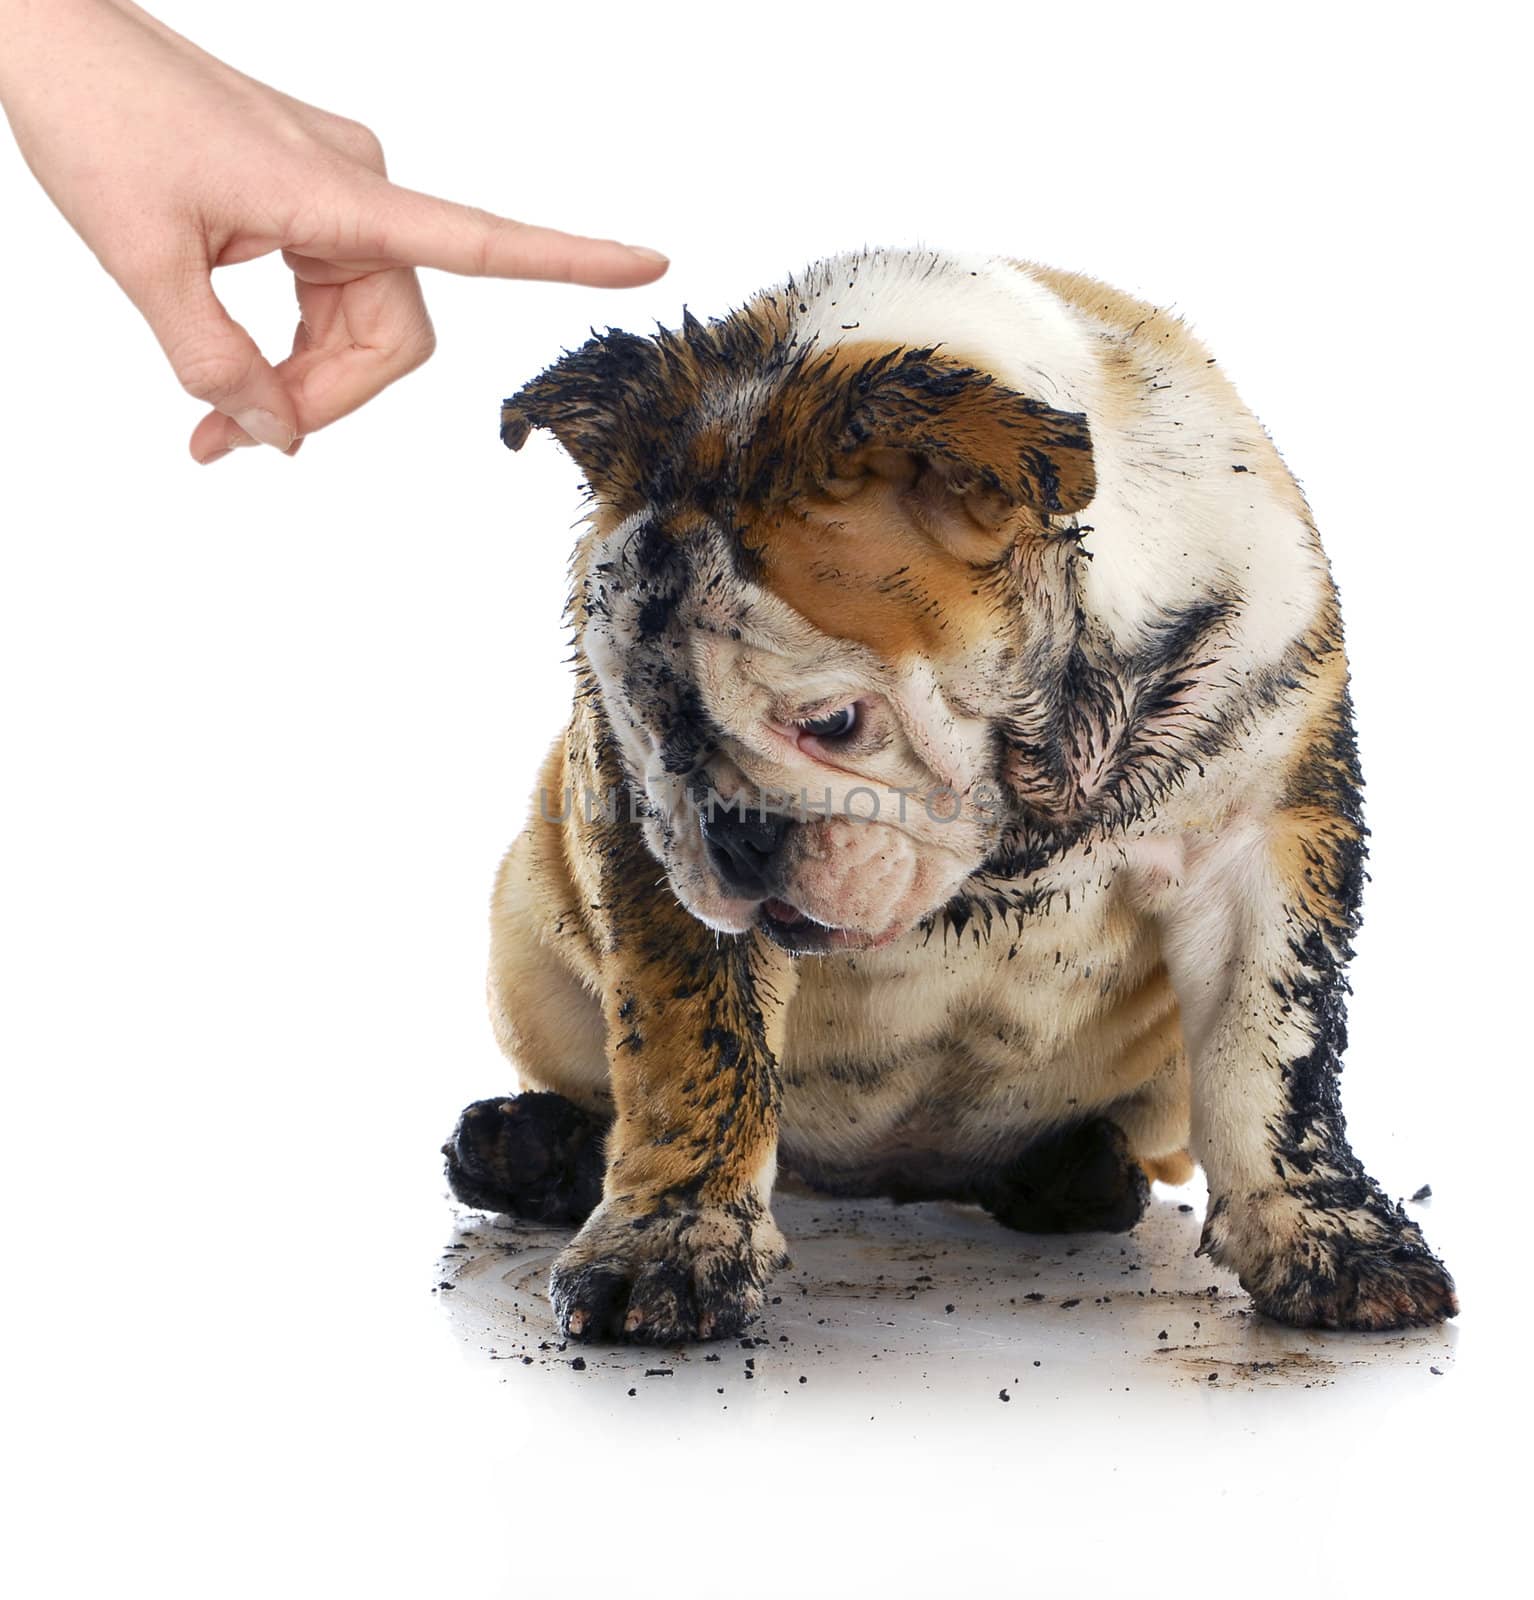 bad dog - dirty sad english bulldog being scolded by wagging finger